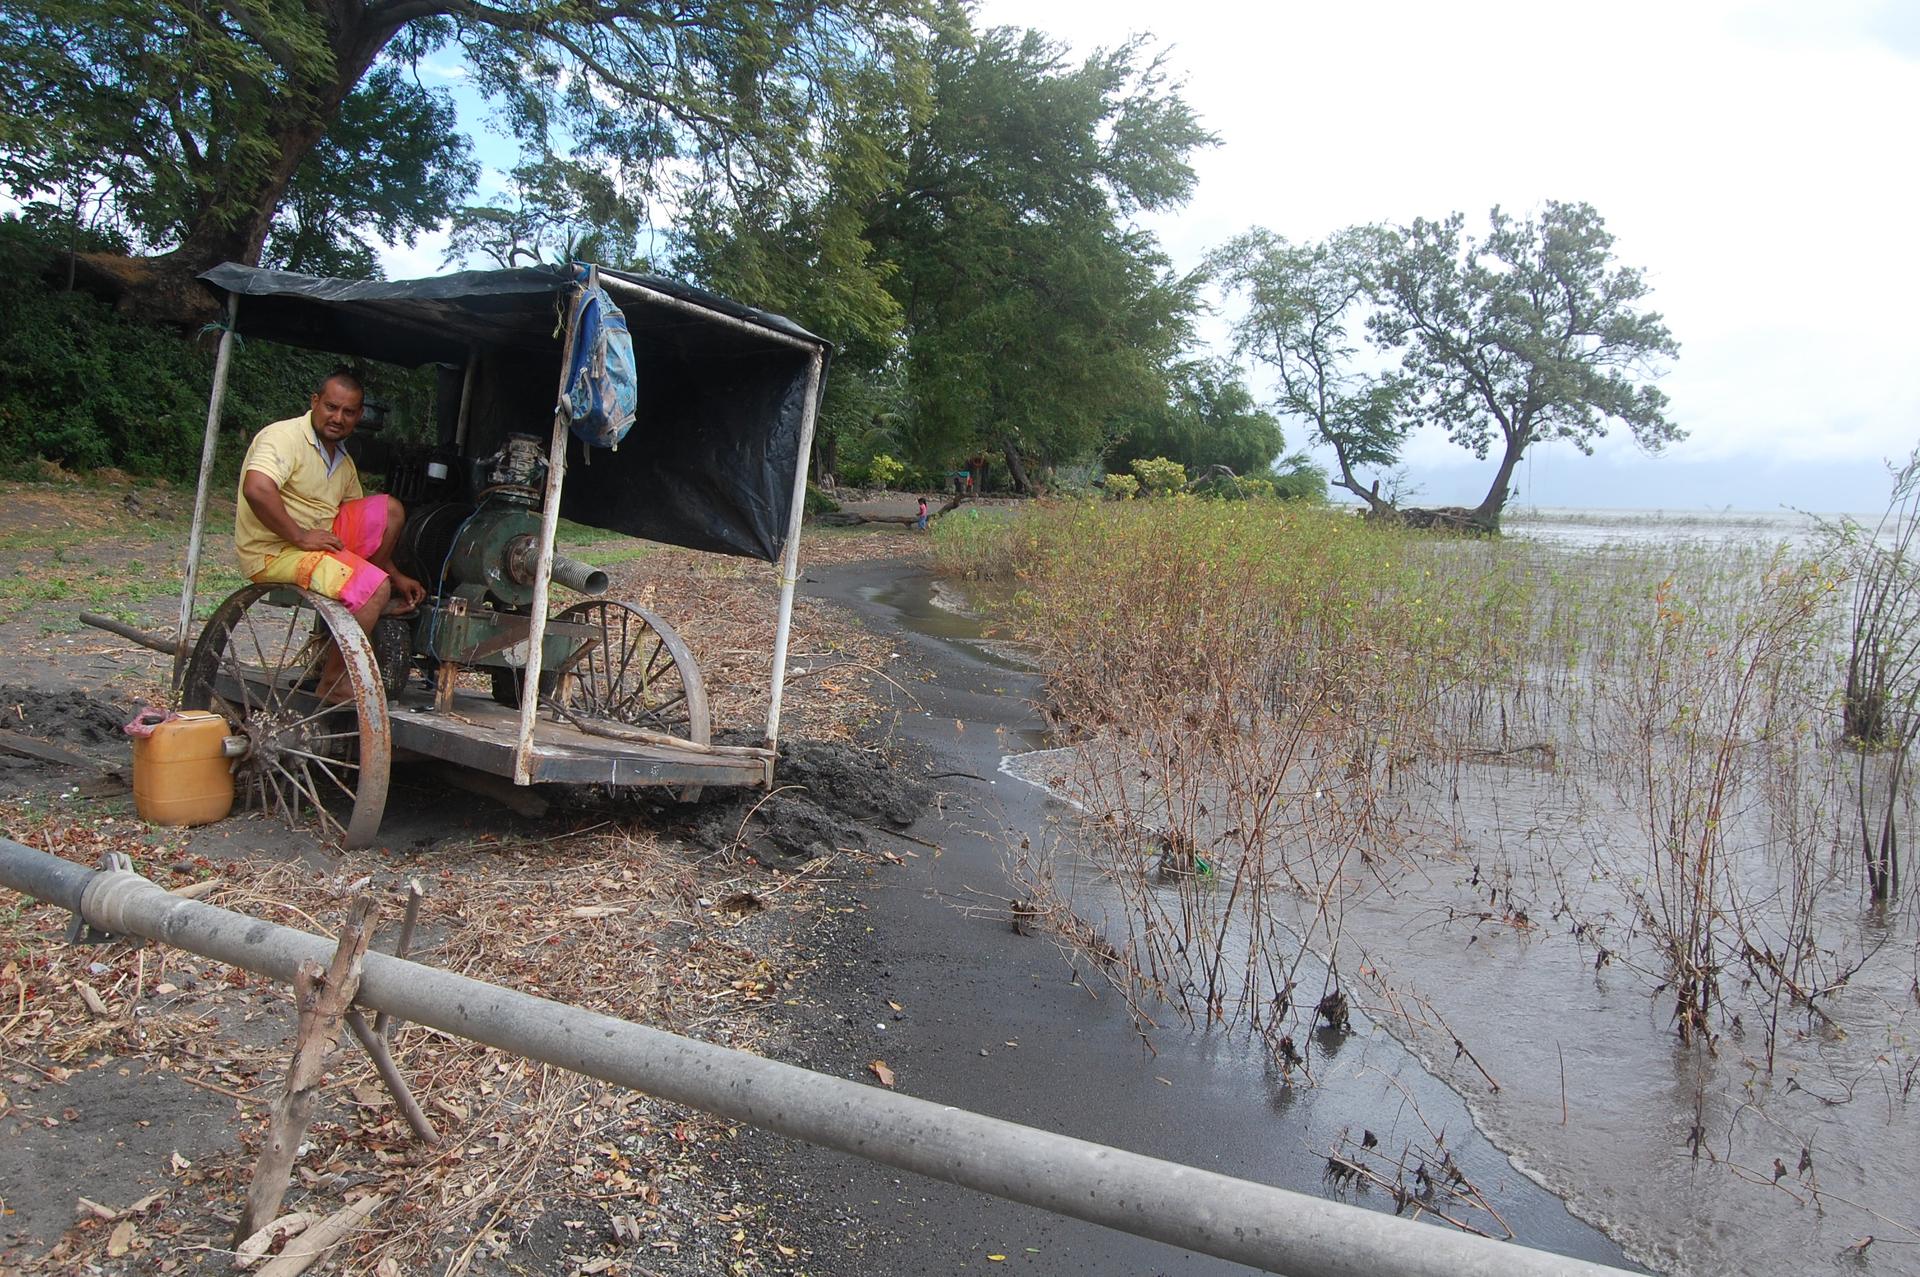 Ometepe farmer Dayton Guzman fixes his irrigation pump on the shore of Lake Nicaragua. Surveyors recently showed up on his farm representing a company that wants to build a hotel related to the canal project. Guzman says he and his family don't want to se